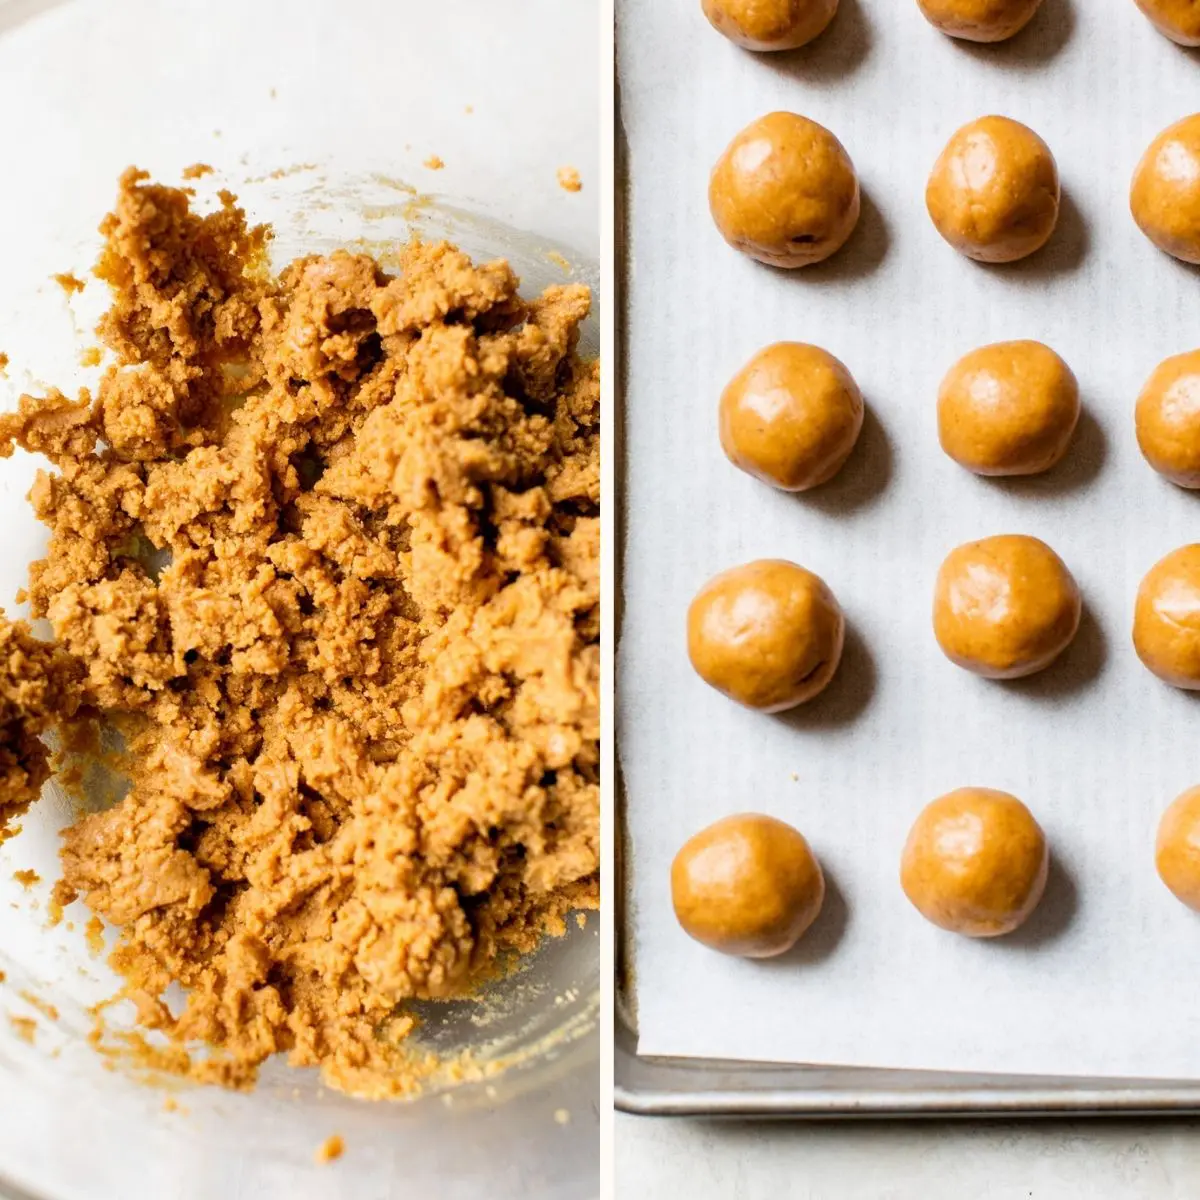 peanut butter rolled into balls on a baking sheet